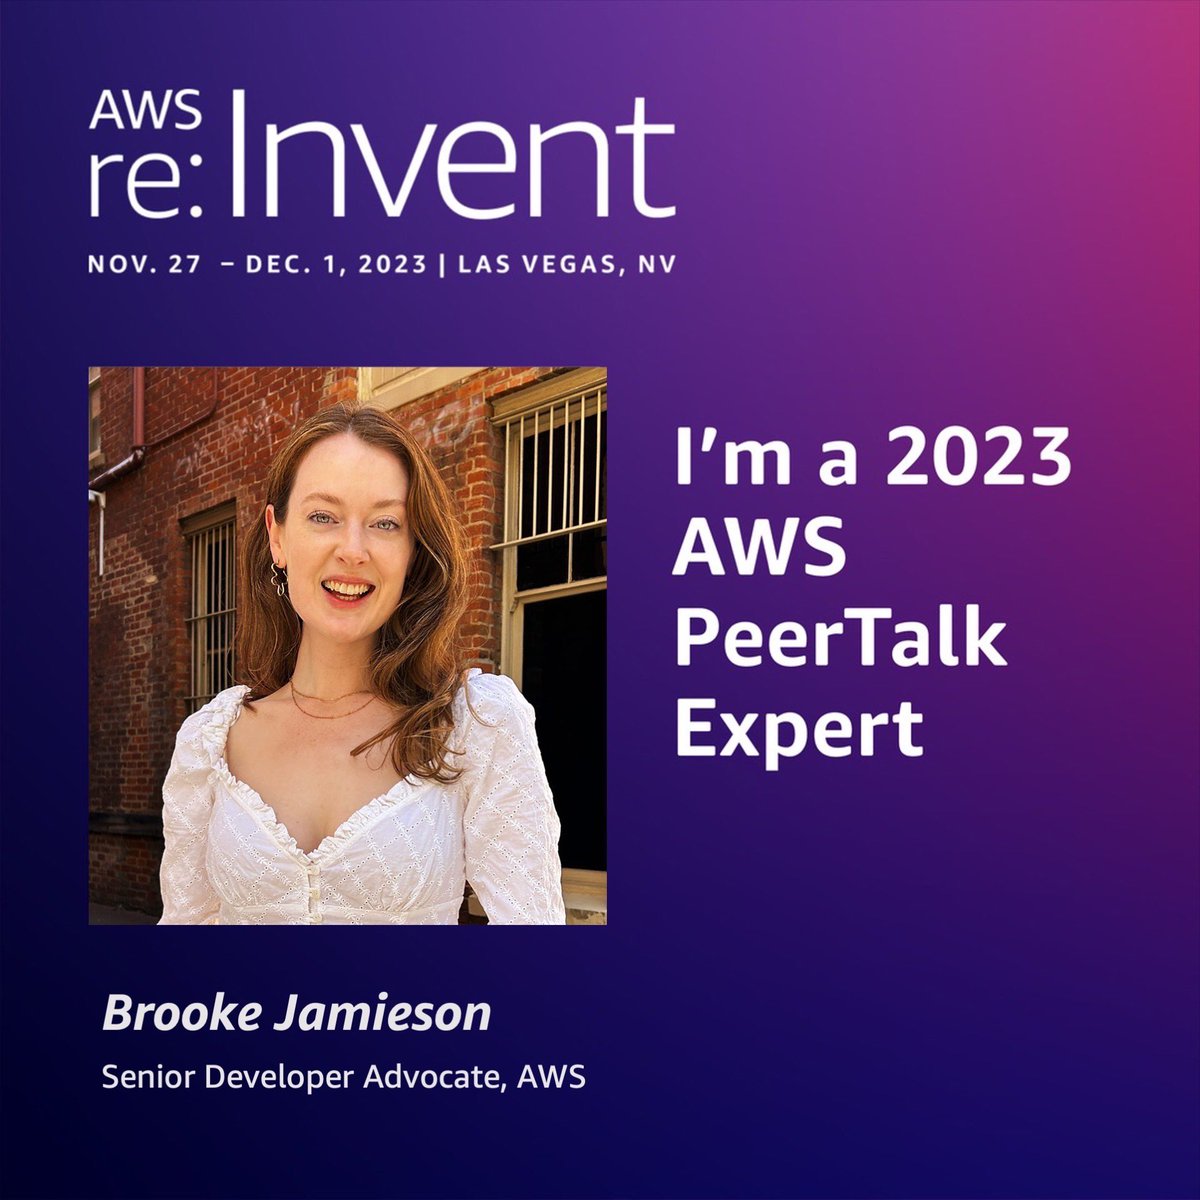 I’m back as a PeerTalk expert for #reInvent 2023! Dive into the world of AWS, make new pals, and maybe even grab a coffee chat with me! Keep your eyes peeled for the launch in early November. Can’t wait to connect with you all! @AWSEvents #AWS
reinvent.awsevents.com/learn/peertalk